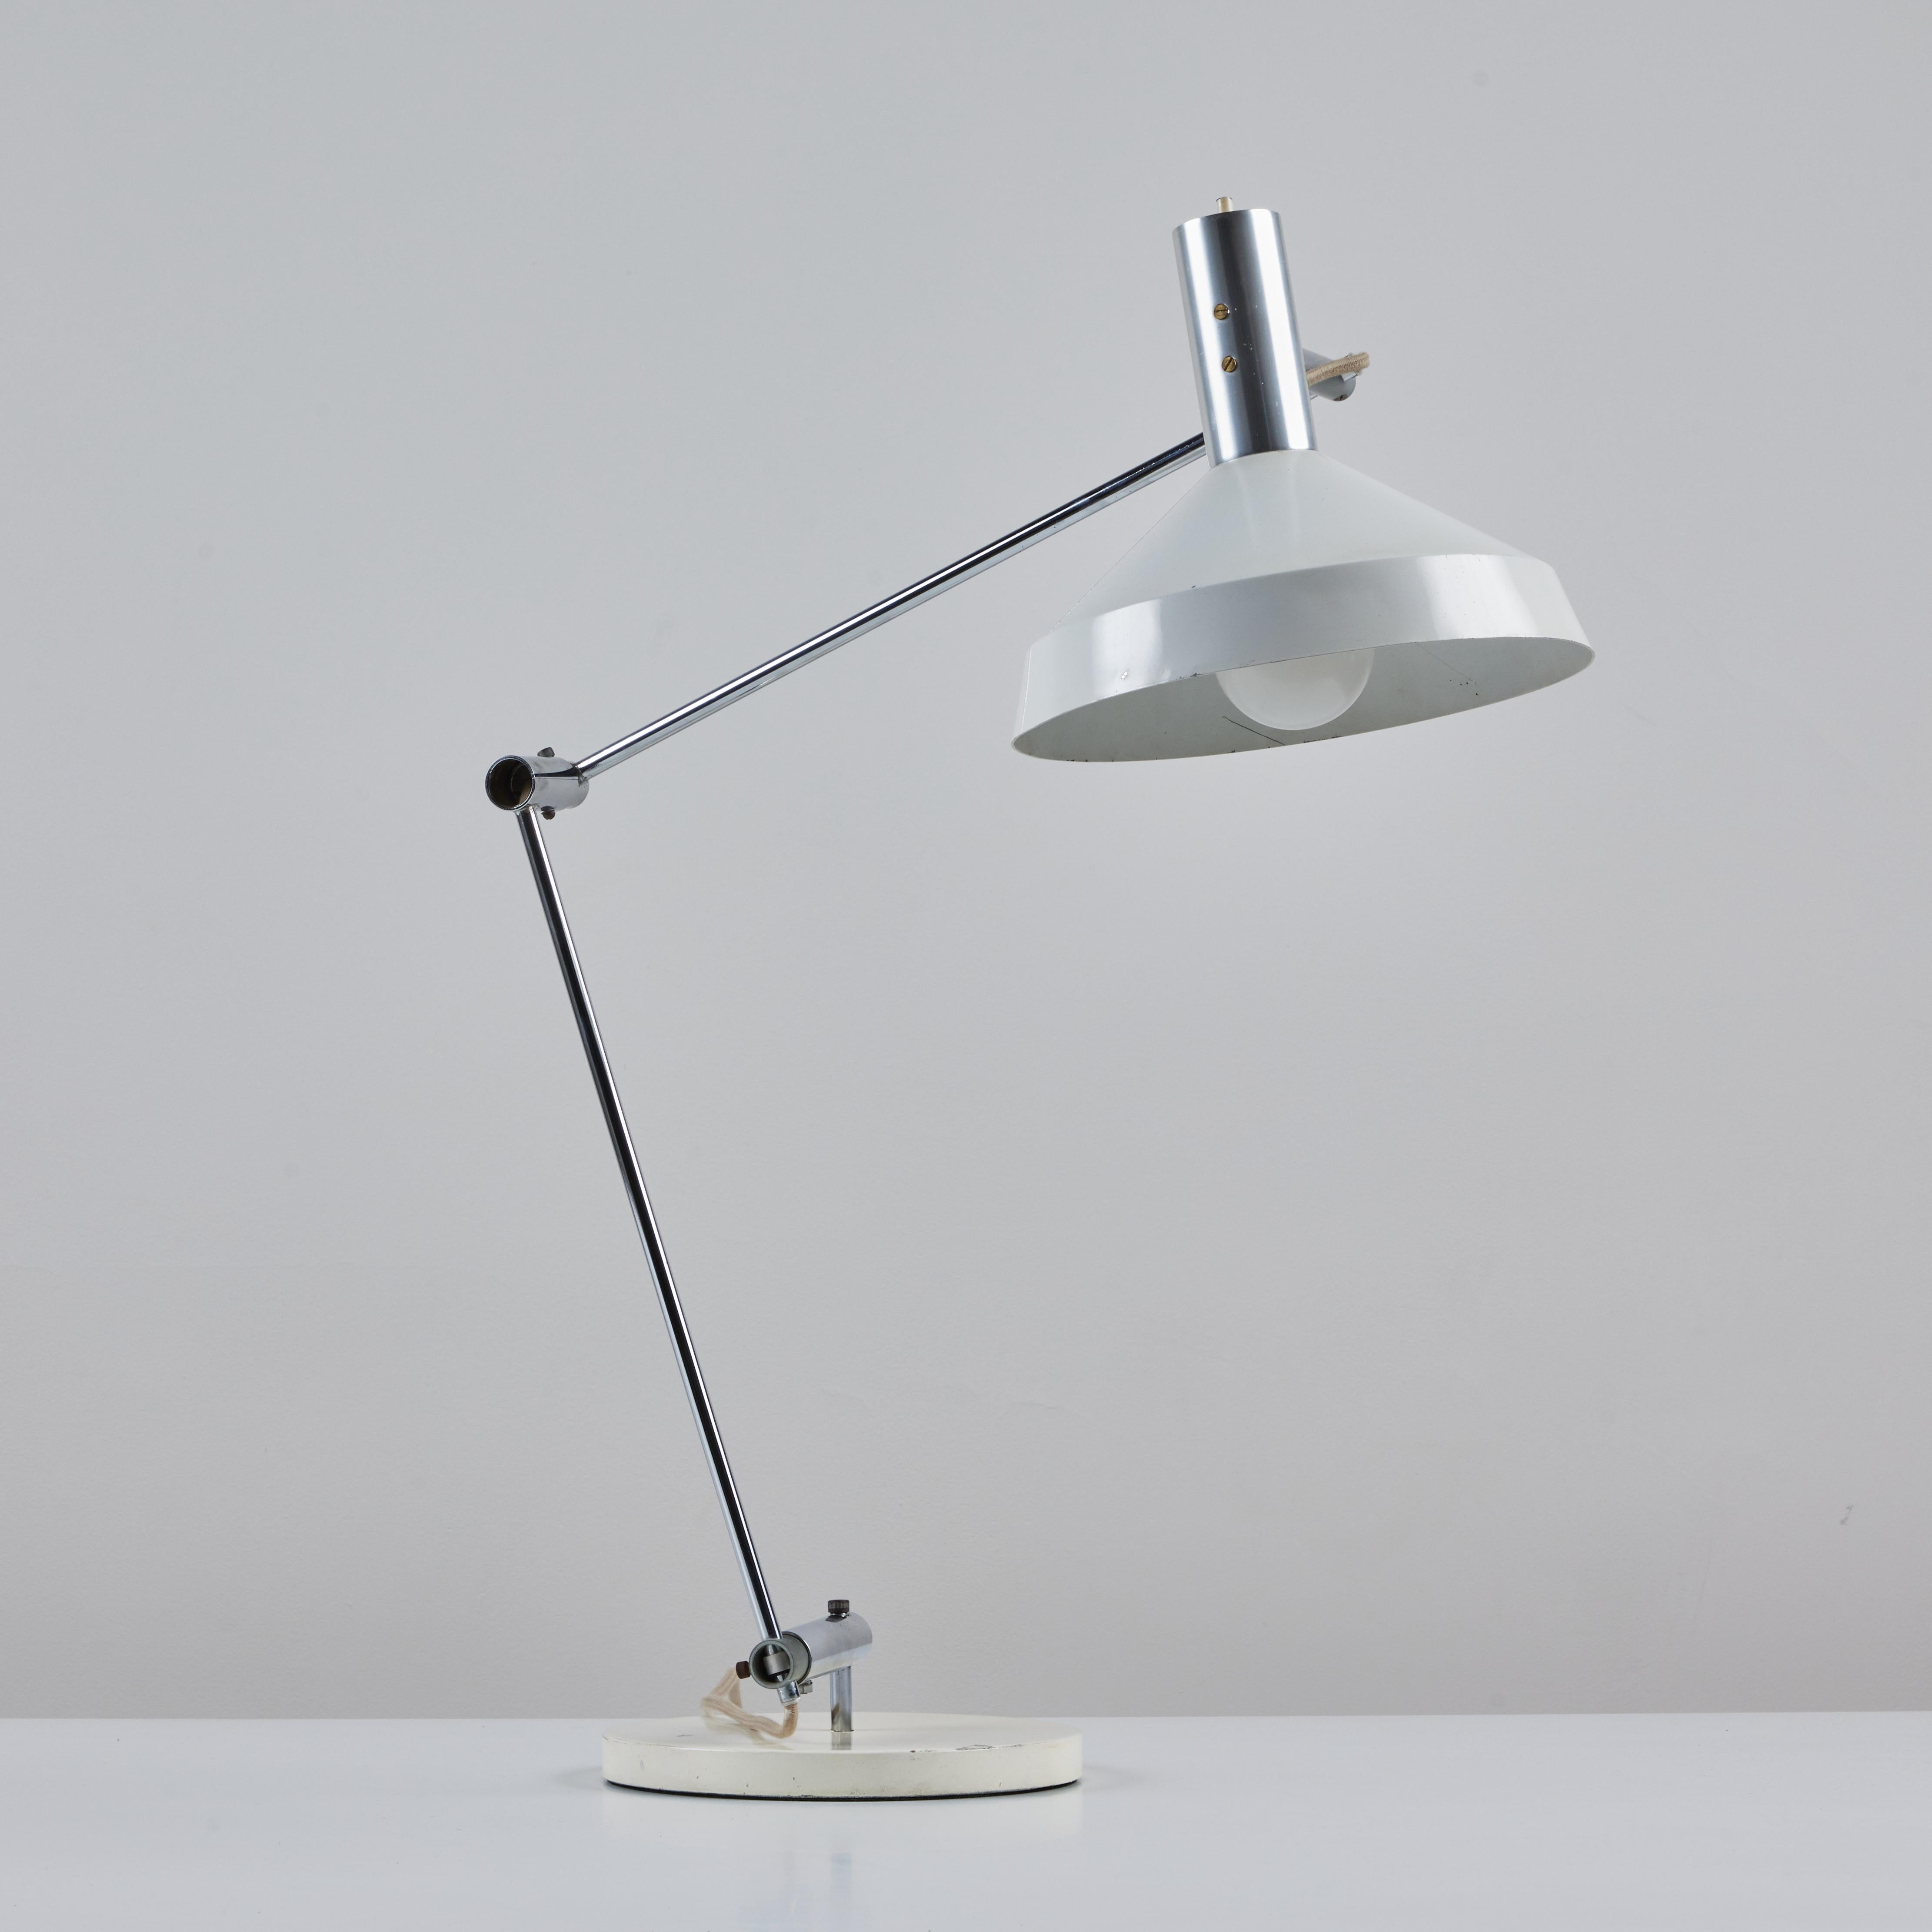 This table lamp comes from the collaboration of Rosemarie & Rico Baltensweiler, c.1960s, Switzerland. The lamp features a white enameled metal base and shade. The chrome plated stem of the lamp articulates while the shade is adjustable allow for